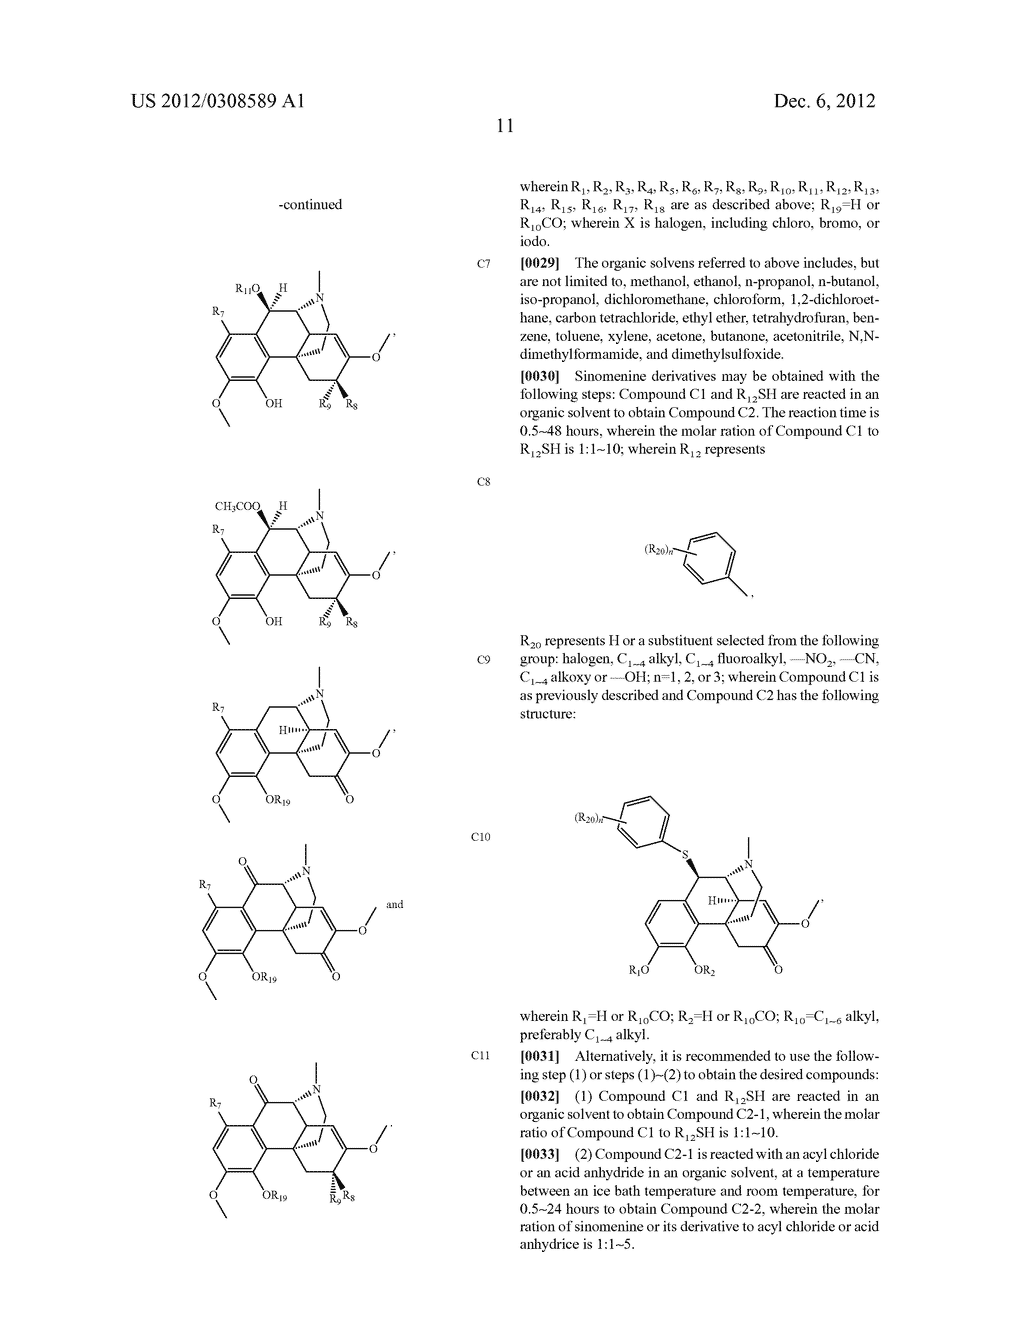 SINOMENINE DERIVATIVES, SYNTHETIC METHODS AND USES THEREOF - diagram, schematic, and image 15